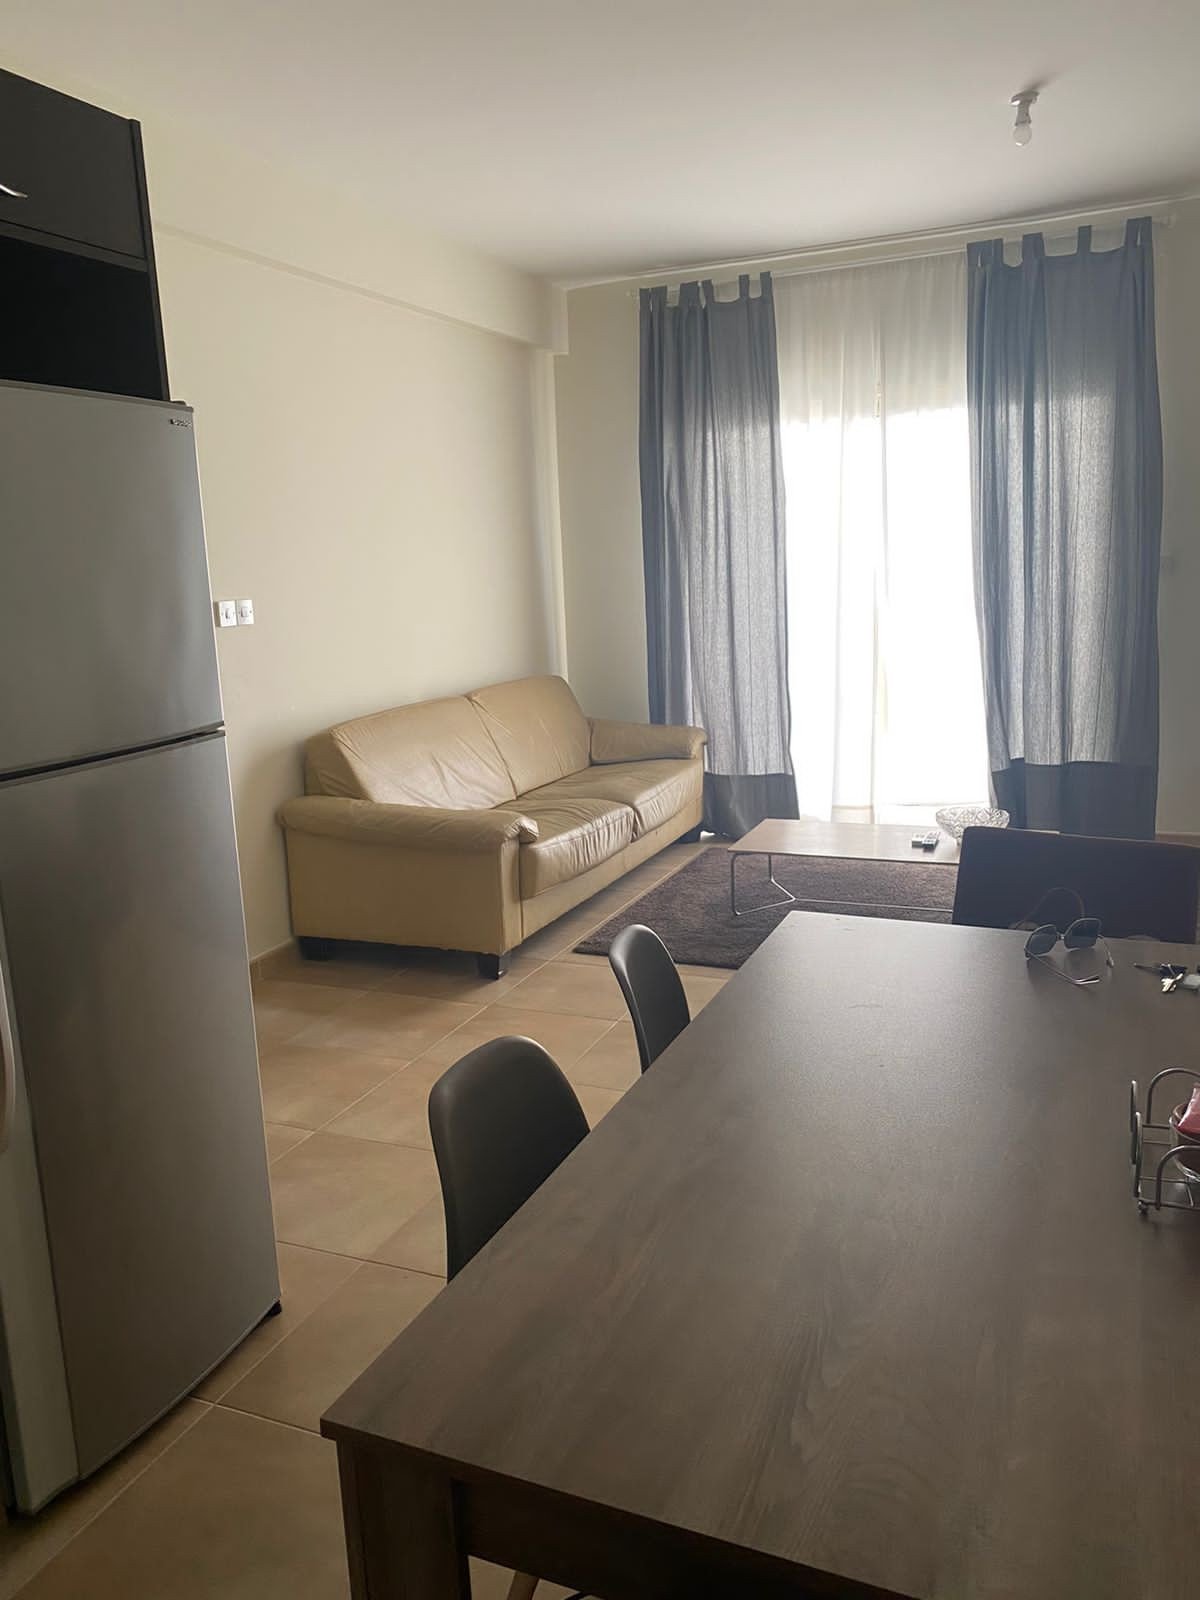 Property for Sale: Apartment (Flat) in Park Lane Area, Limassol  | Key Realtor Cyprus